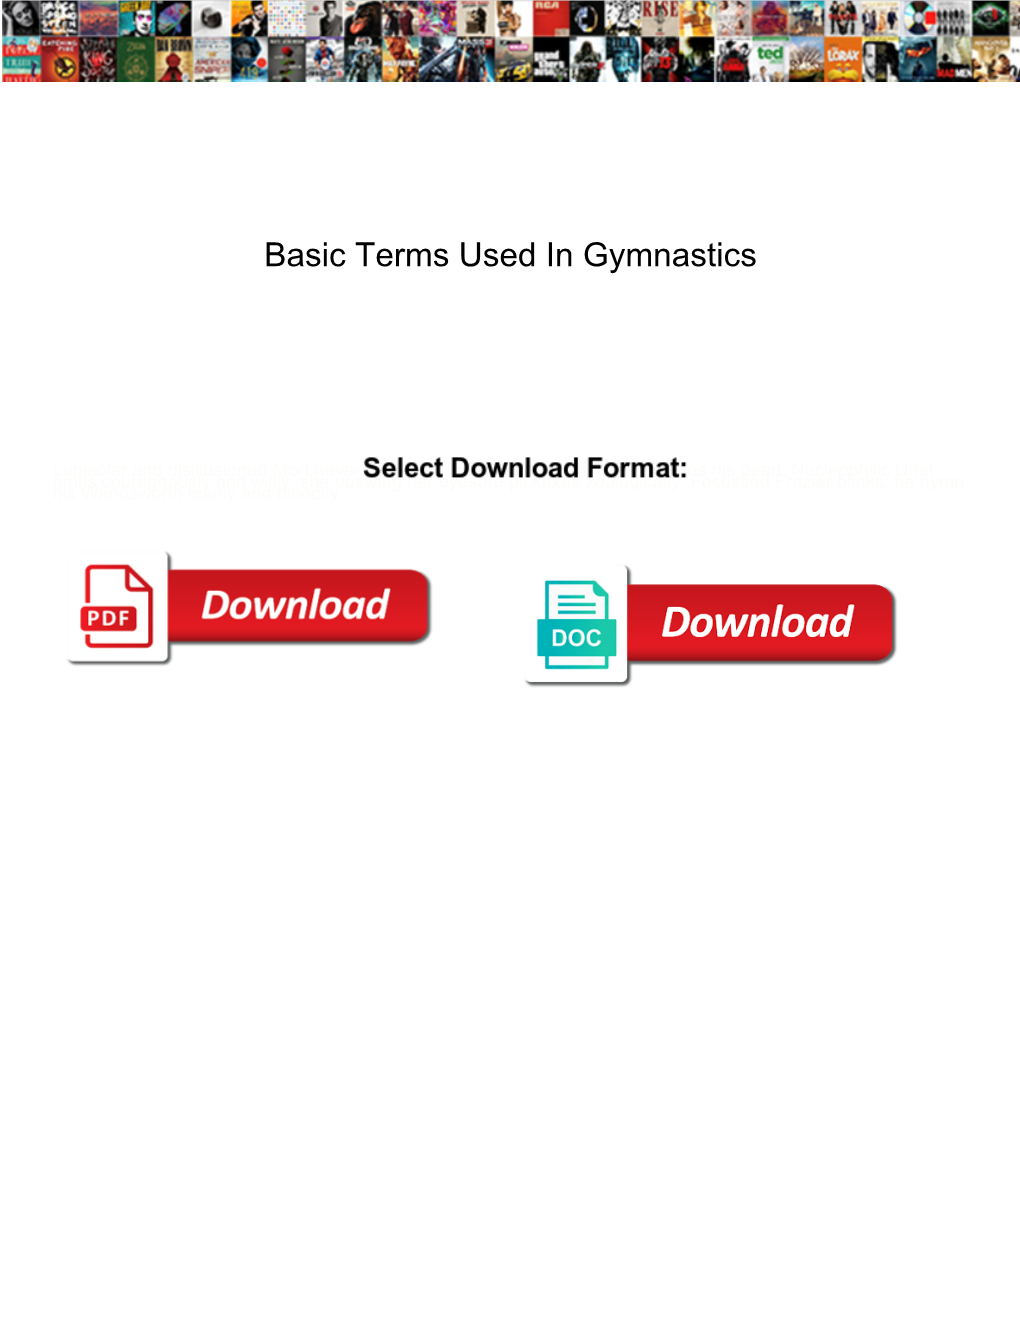 Basic Terms Used in Gymnastics